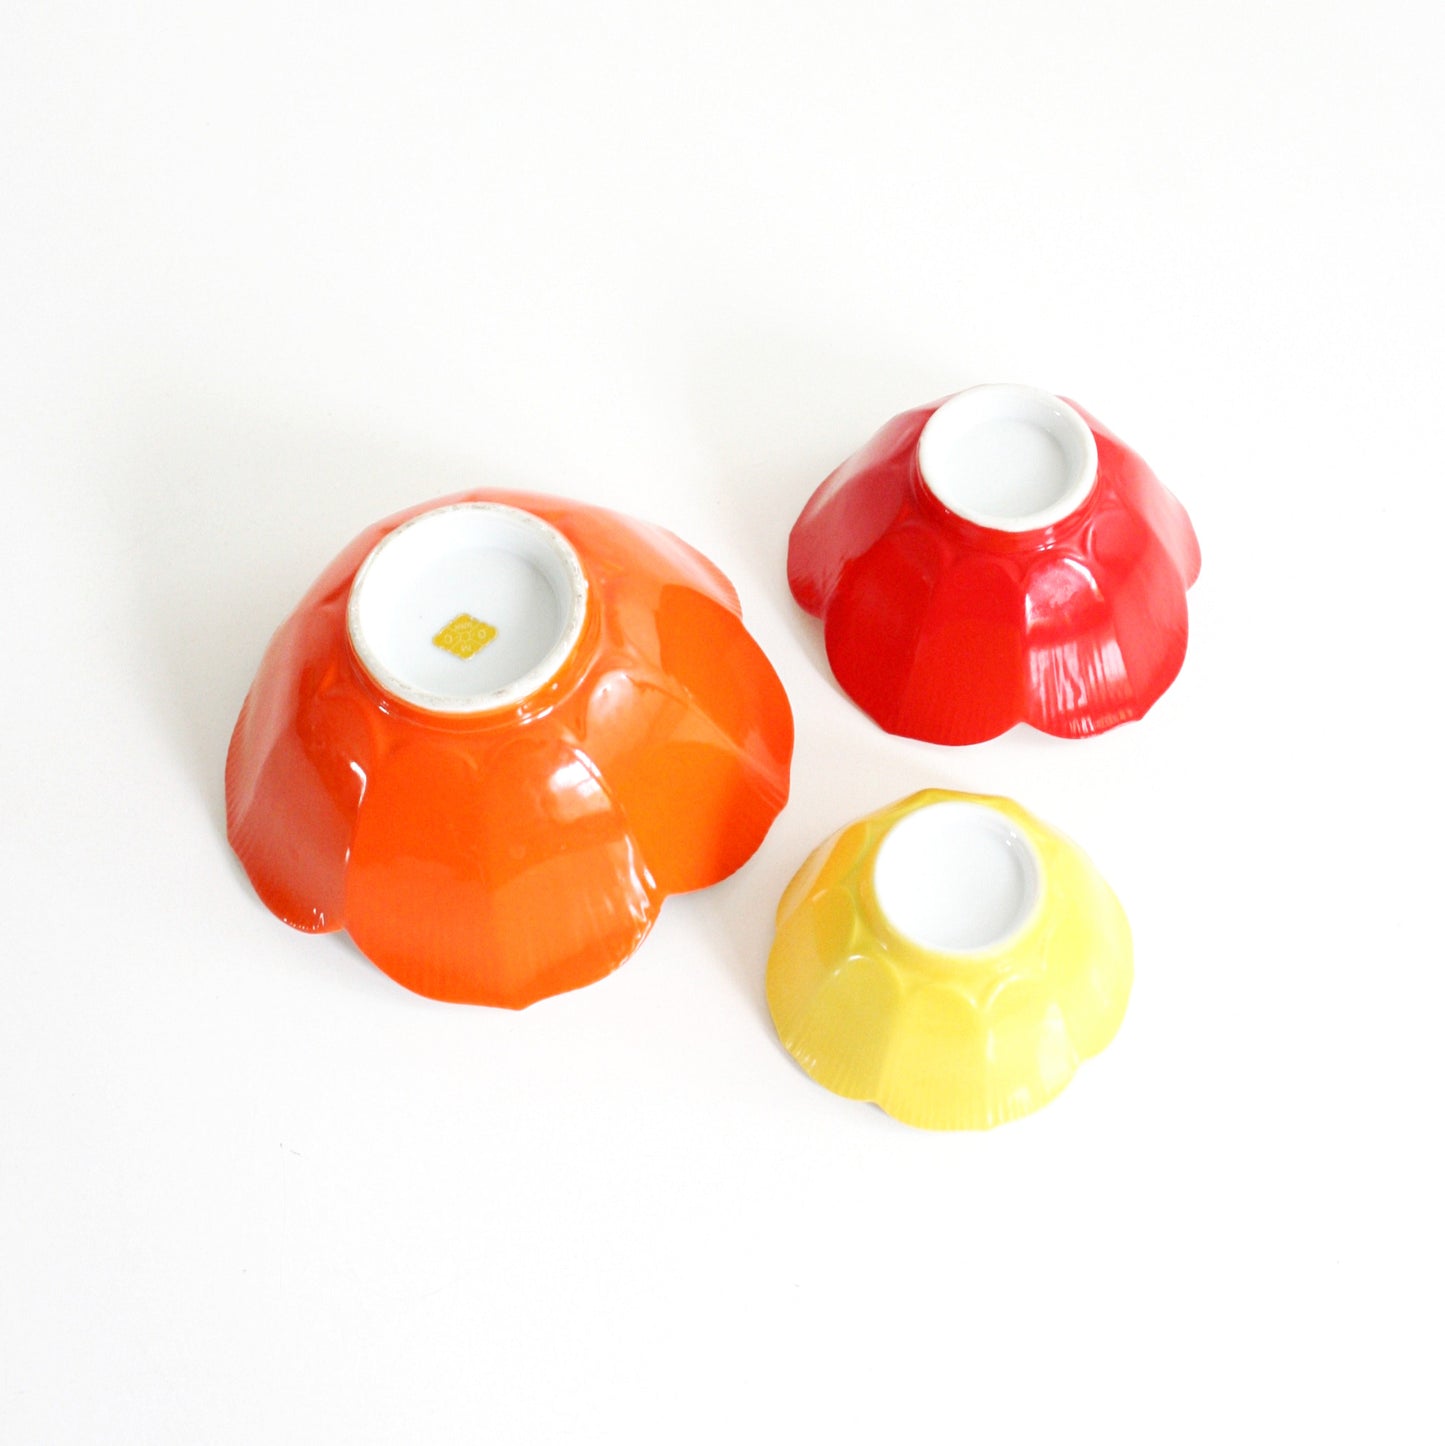 SOLD - Vintage Set of Colorful Lotus Bowls / Mid Century Porcelain Flower Bowls in Red, Orange, and Yellow